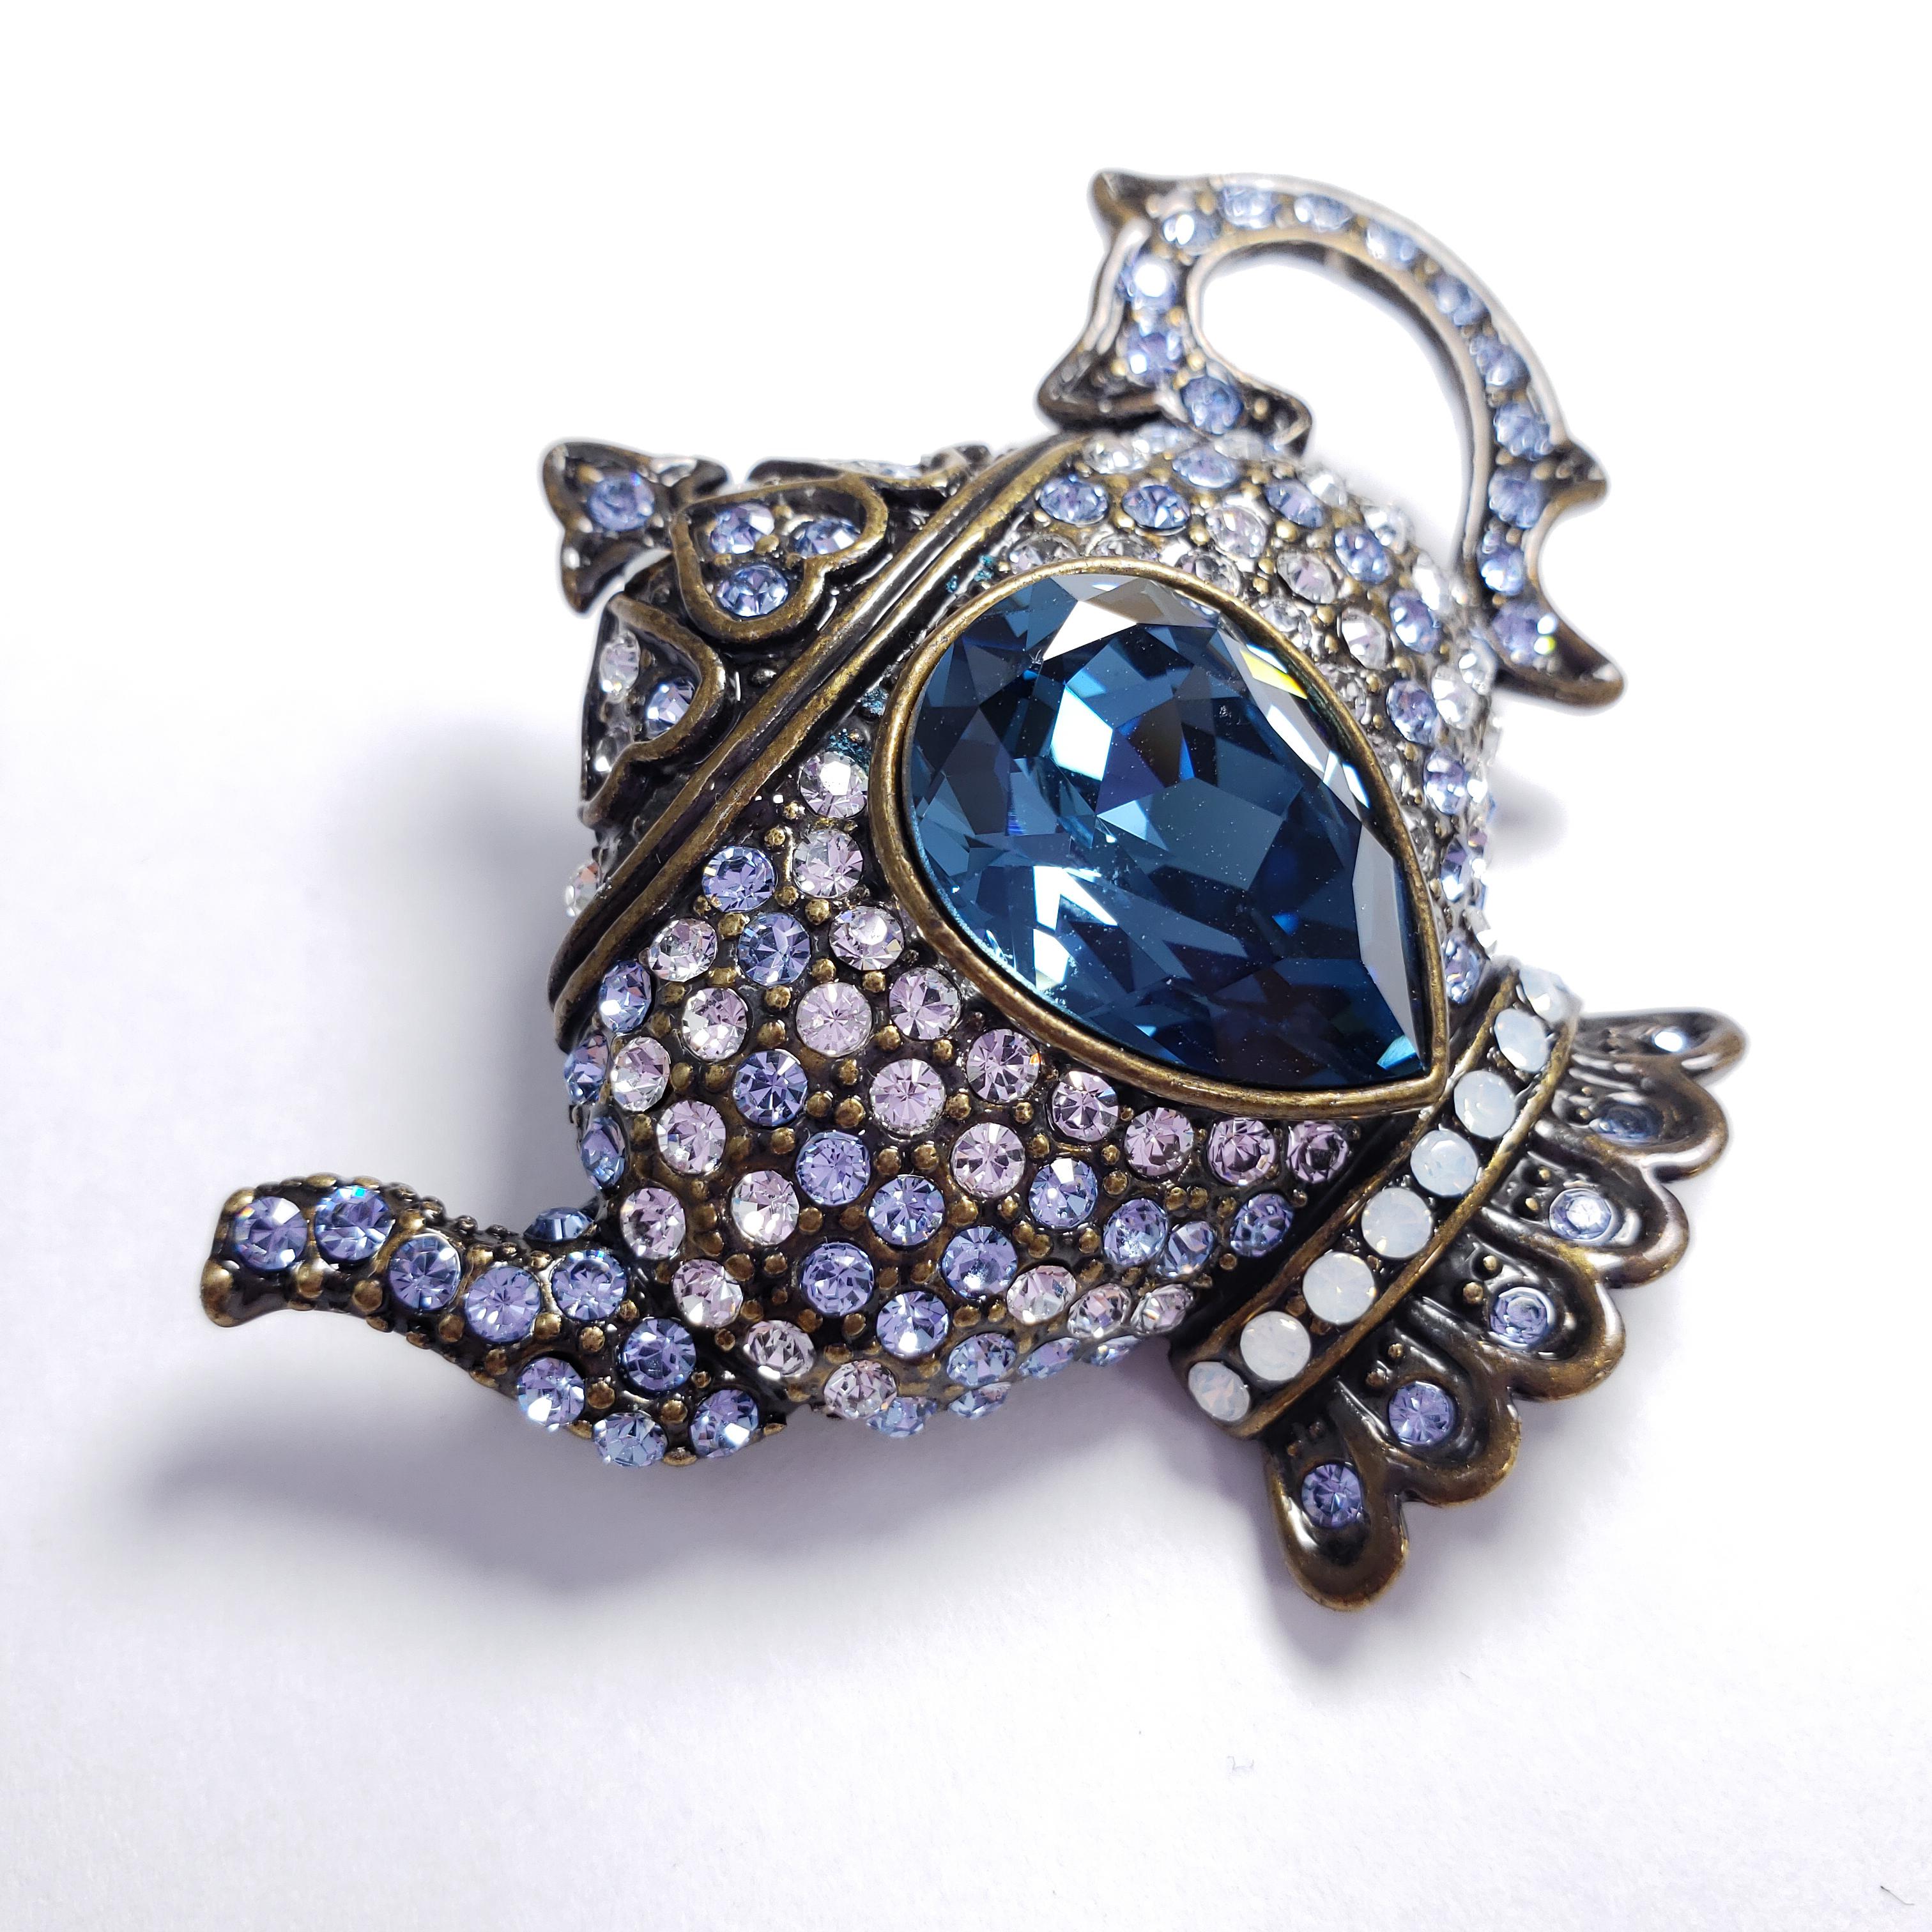 A whimsical pin brooch, featuring a teapot decorated with clear and blue pave crystals, along with a large centerpiece pear-cut blue crystal. By Heidi Daus.

Hallmarks: Heidi Daus, China
Originally made by Heidi Daus for her exclusive HSN line